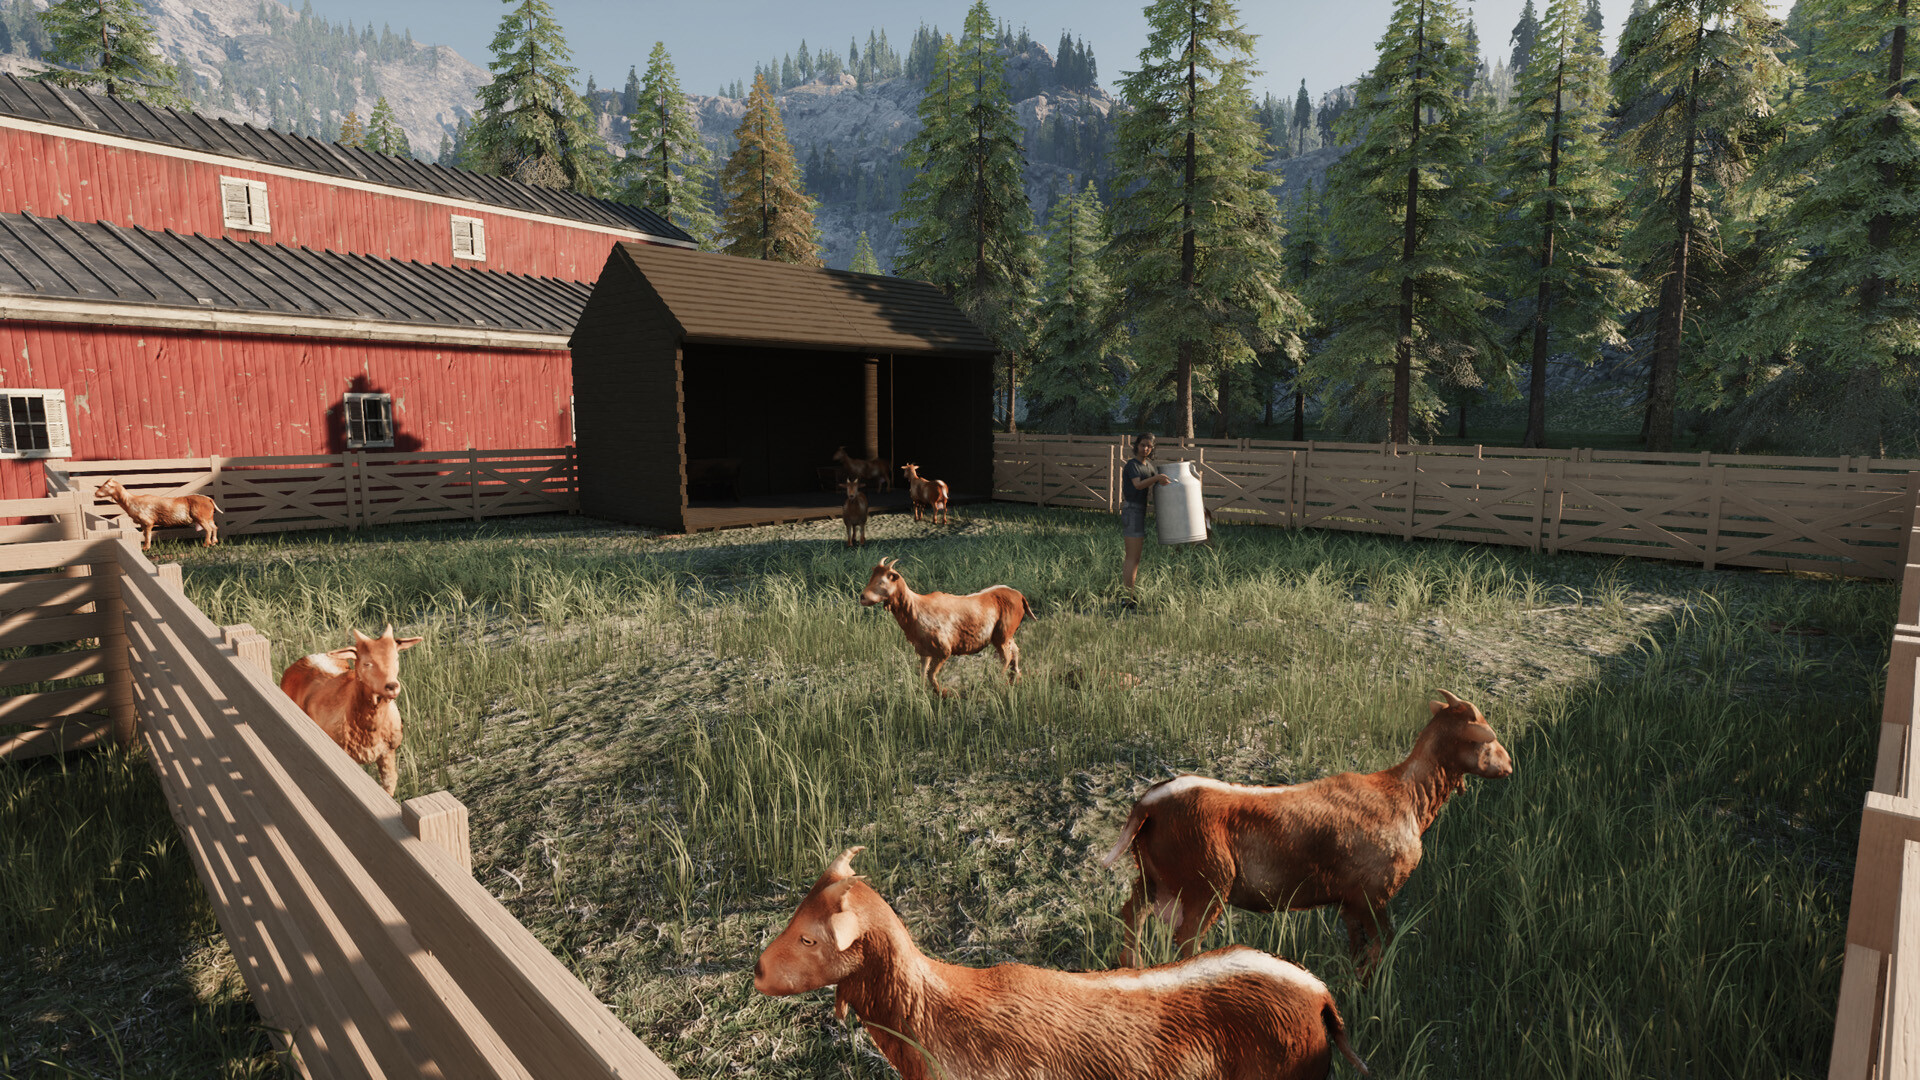 What's On Steam - Ranch Simulator - The Realistic Multiplayer